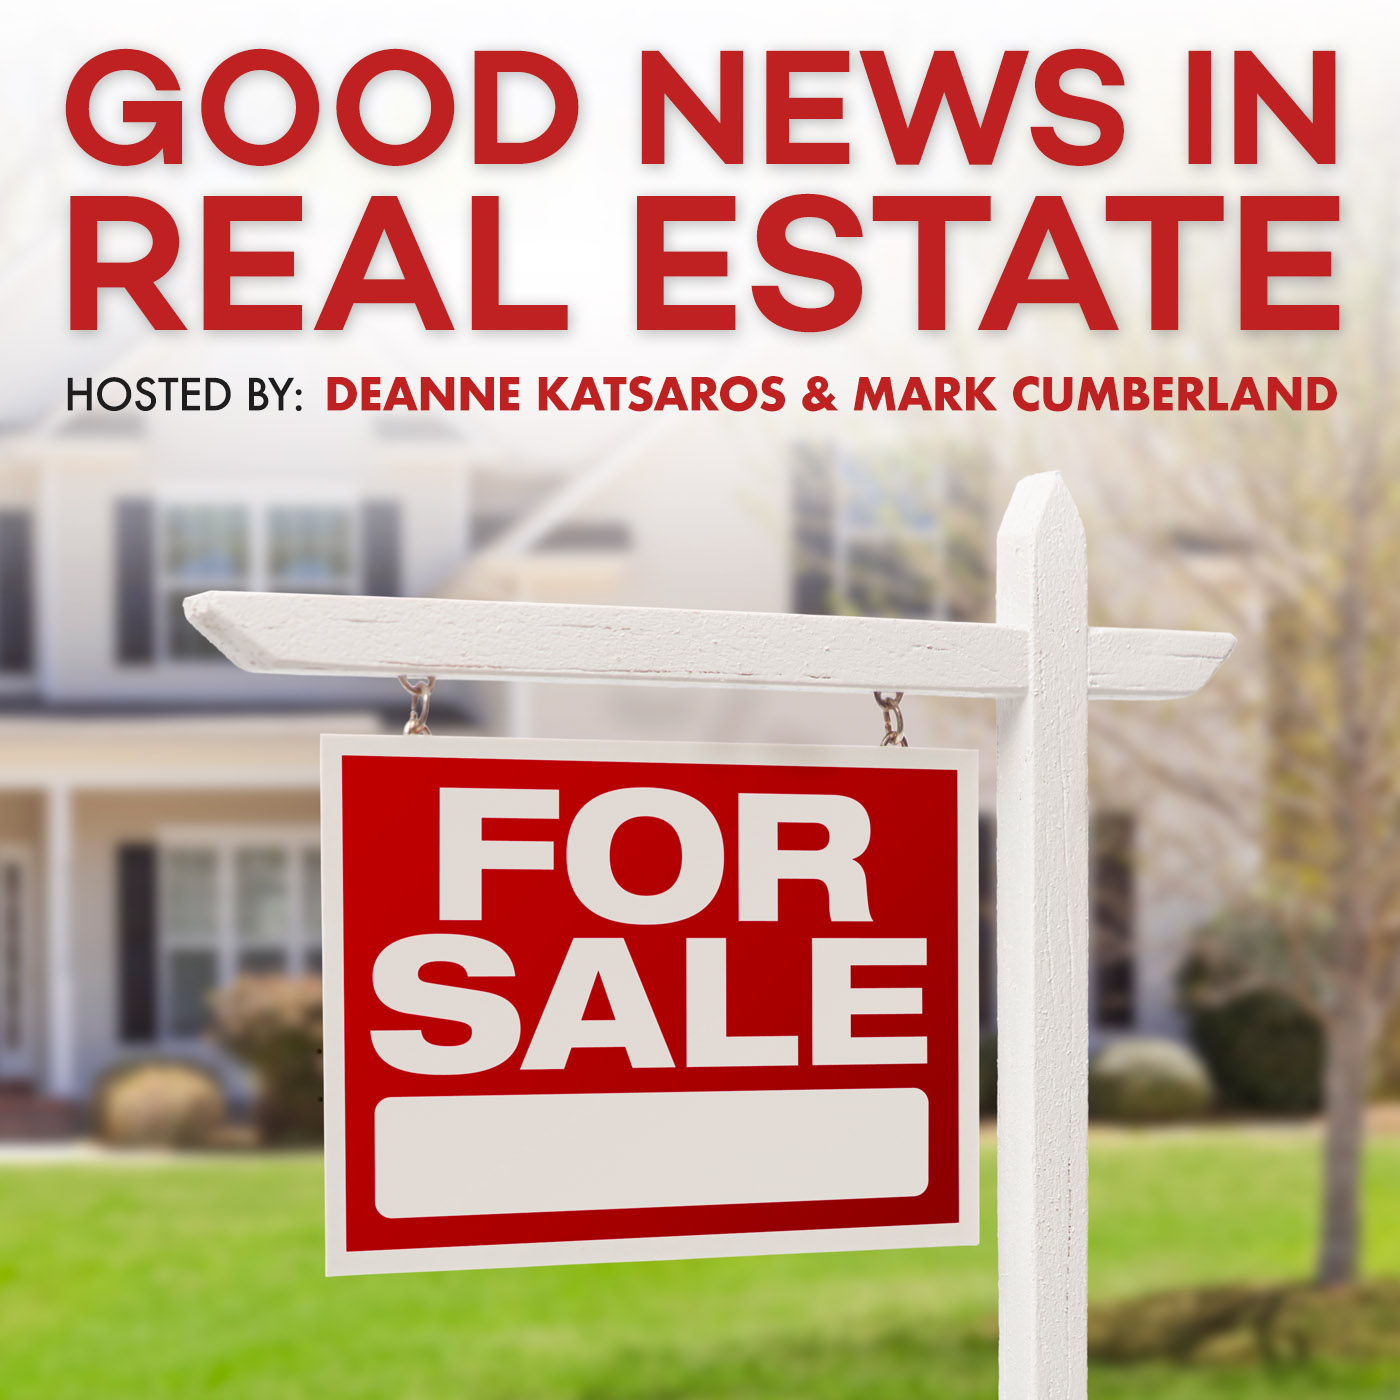 May 7, 2022 | Good News In Real Estate